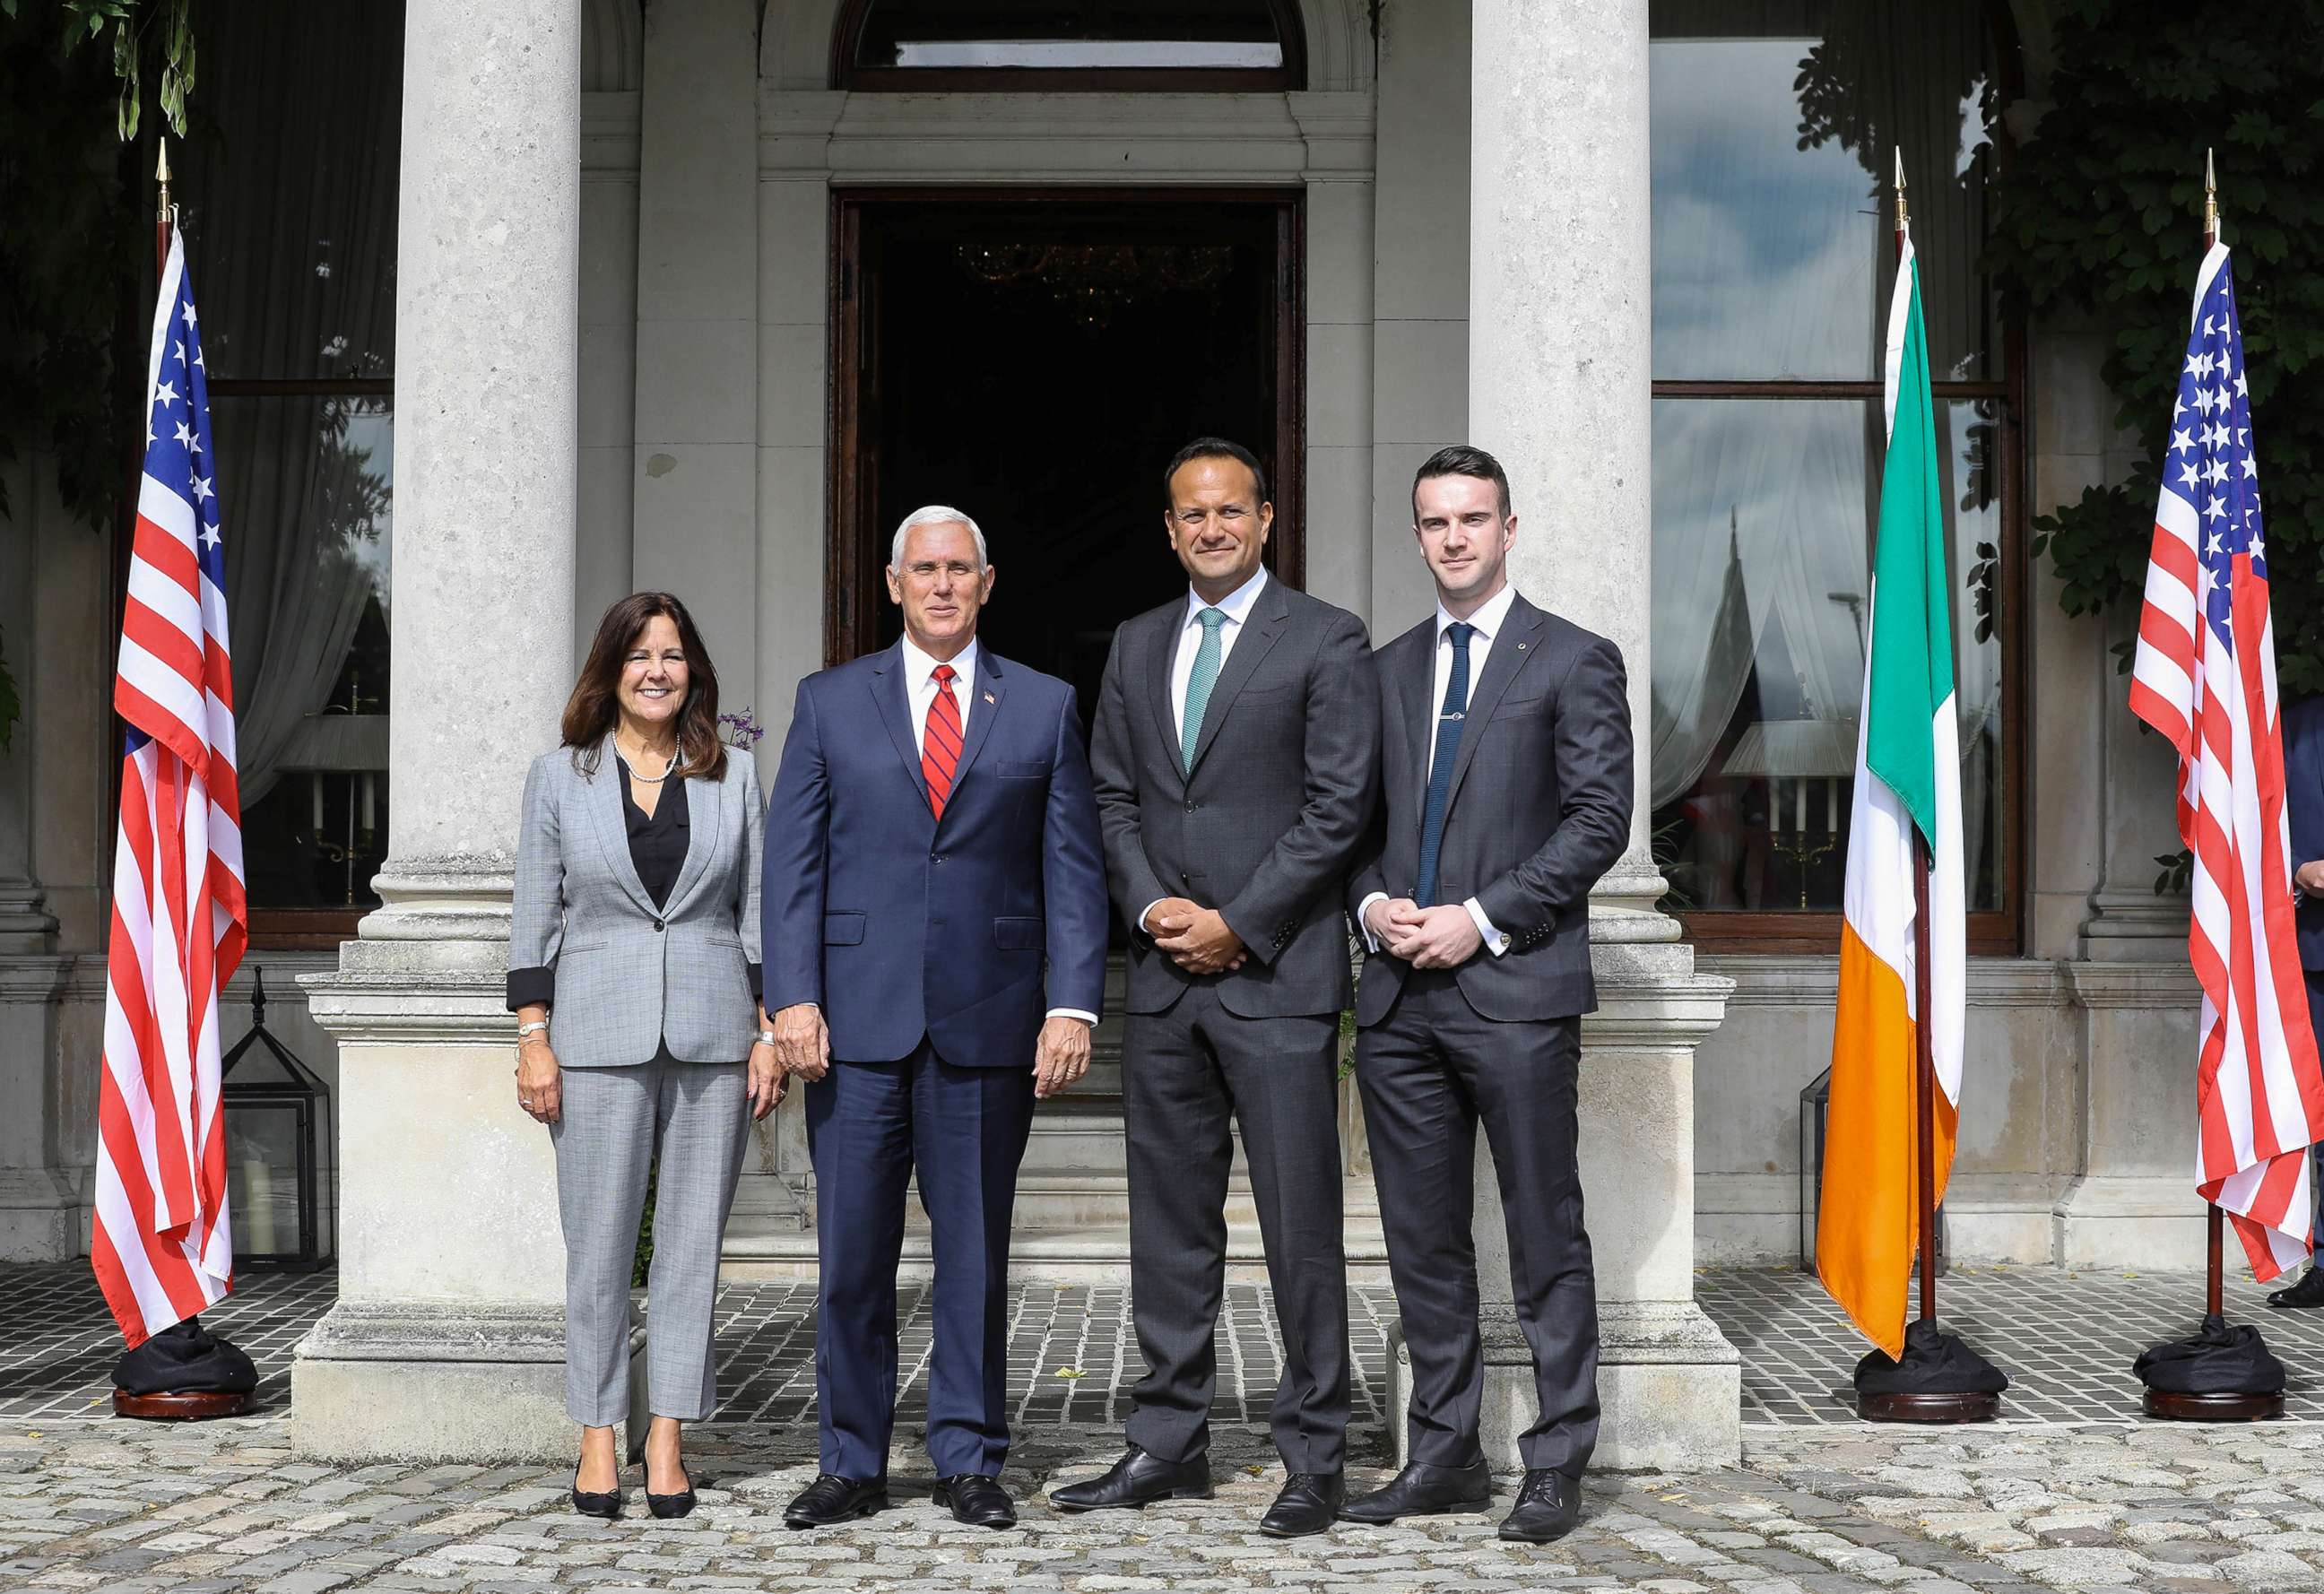 PHOTO: Vice-President Mike Pence and his wife Karen Pence pose for a photo with Irish Taoiseach (Prime Minister) Leo Varadkar and his partner Dr.Matt Barrett in Dublin, Ireland, September 3, 2019.